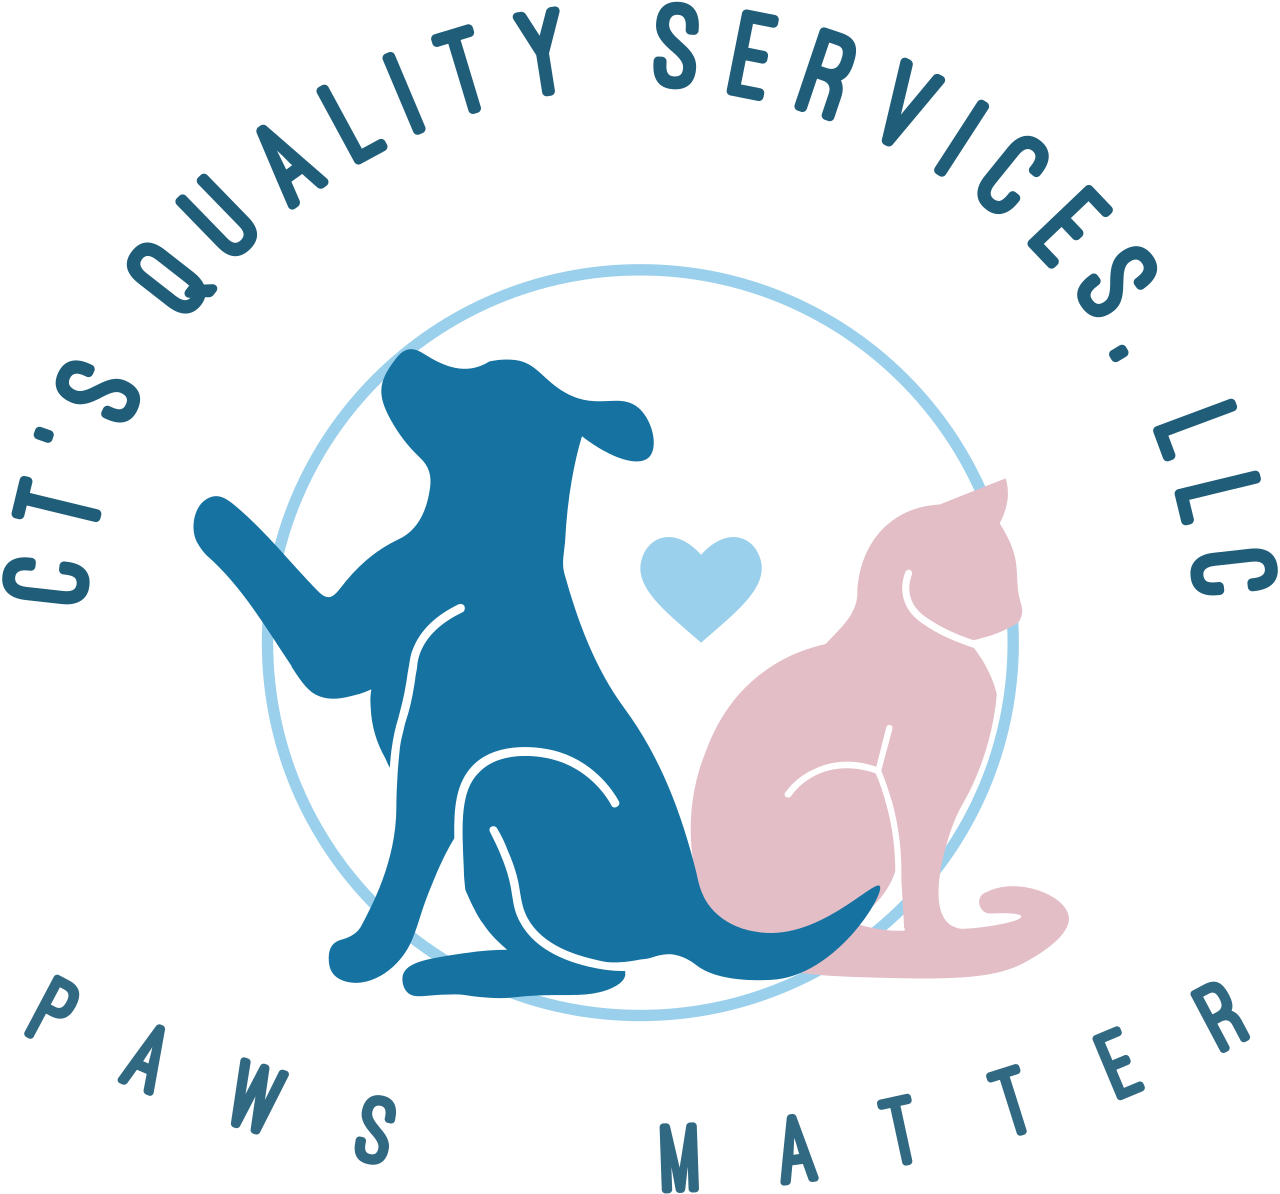 CT'S QUALITY SERVICES, LLC's web page